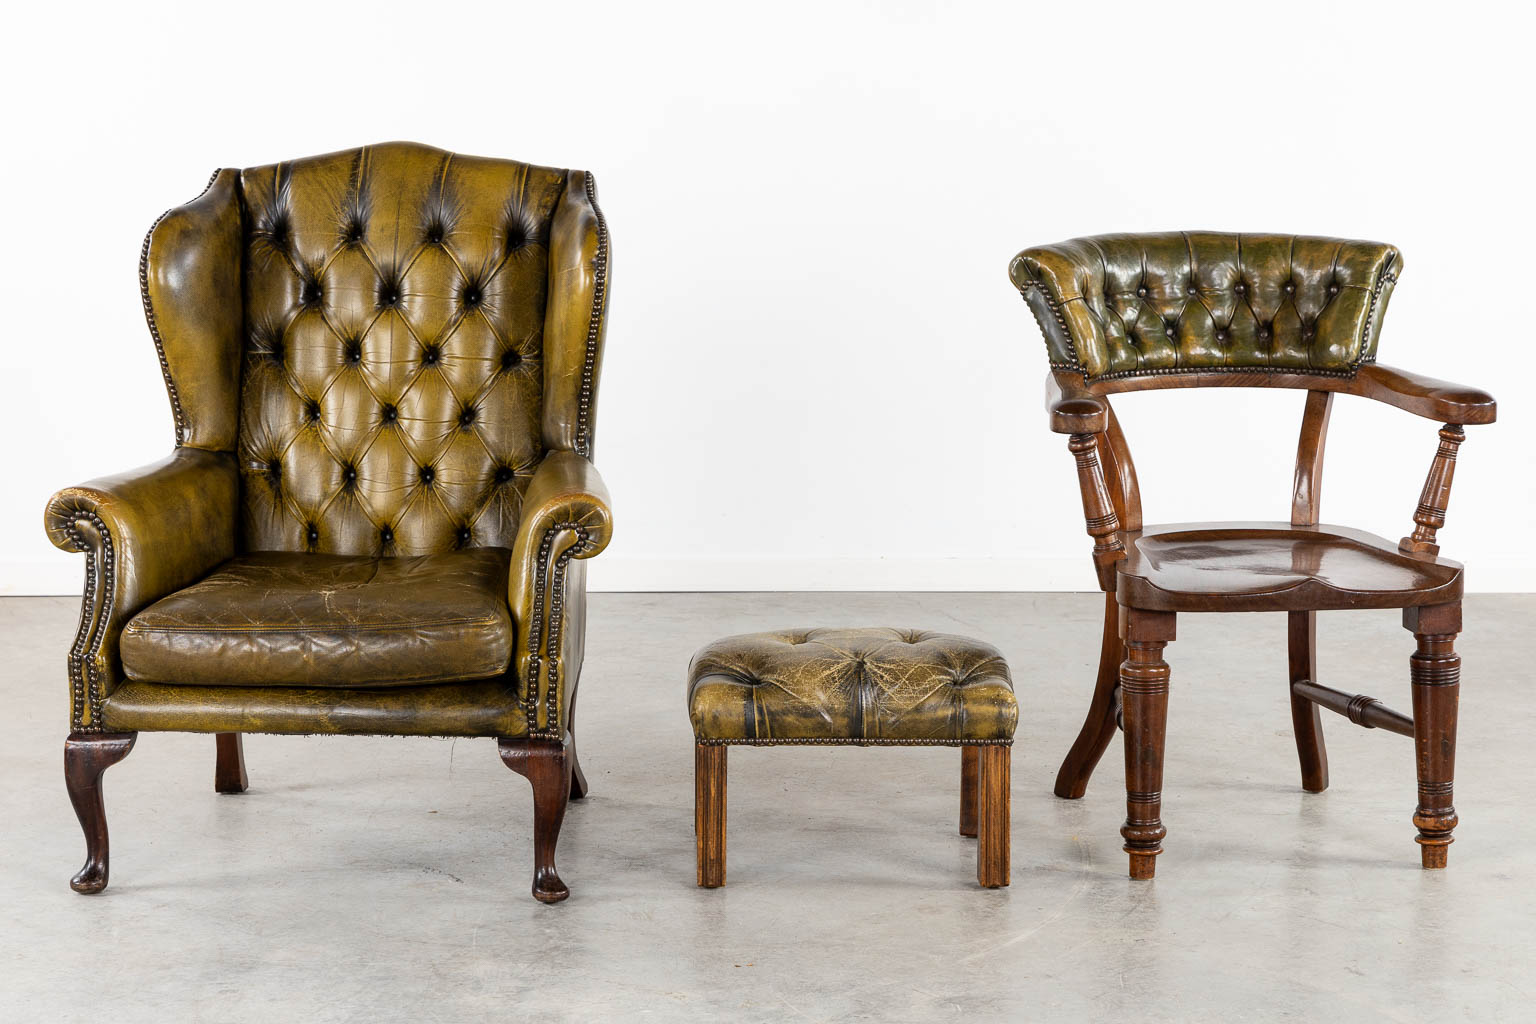 A Lounge chair, office chair and ottoman, Leather on wood, Chesterfield. (L:84 x W:80 x H:100 cm) - Image 3 of 13